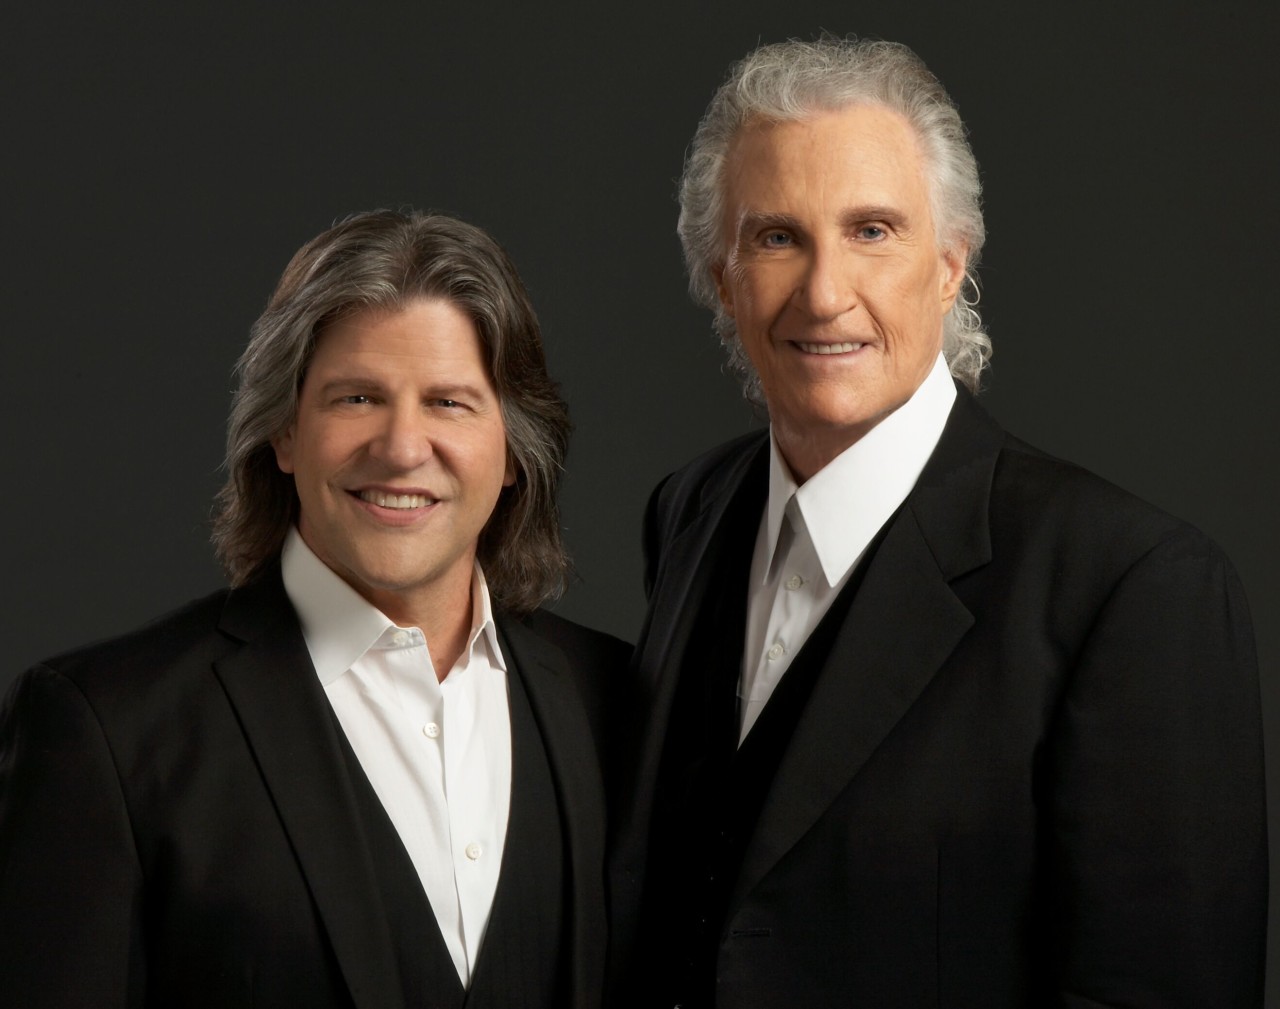 The righteous brothers i servis su